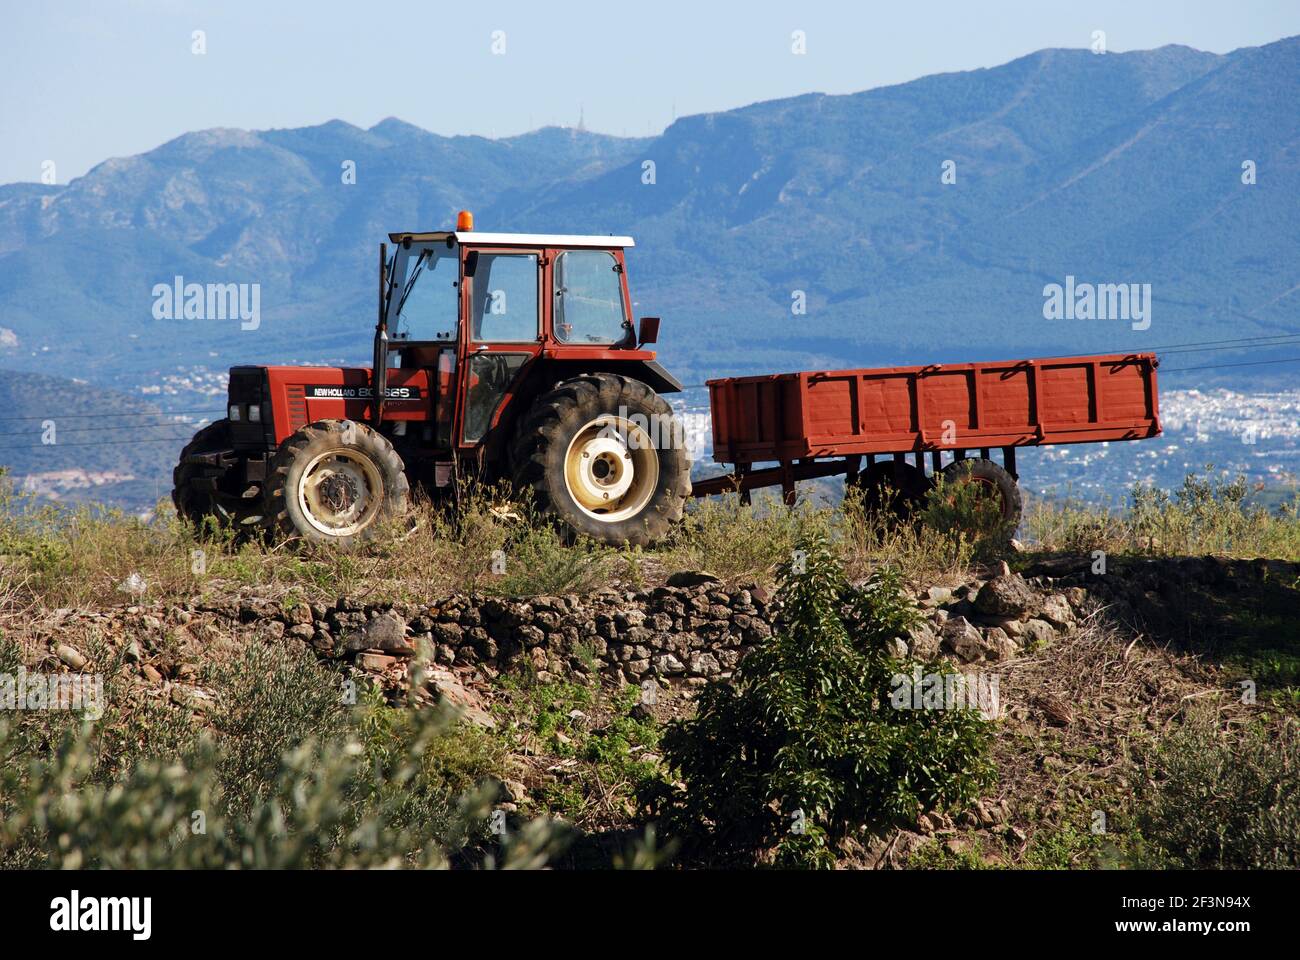 Agriculture is a main source of income for many people who live in the mountains above the Costa del Sol coastline. Stock Photo